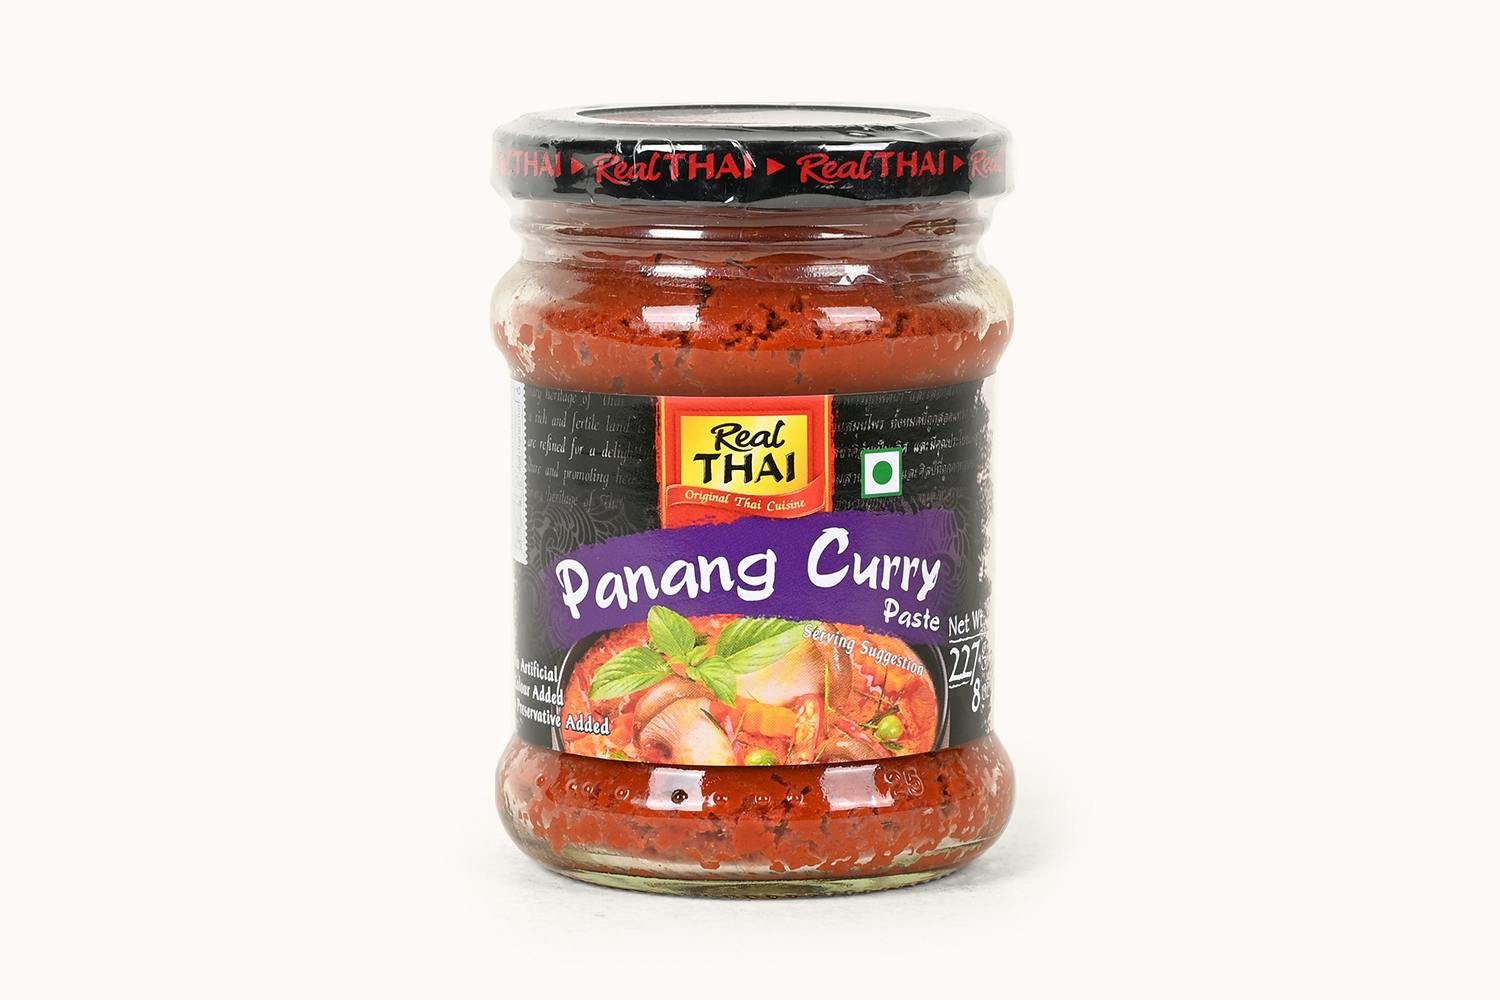 Real Thai Penang Curry Paste